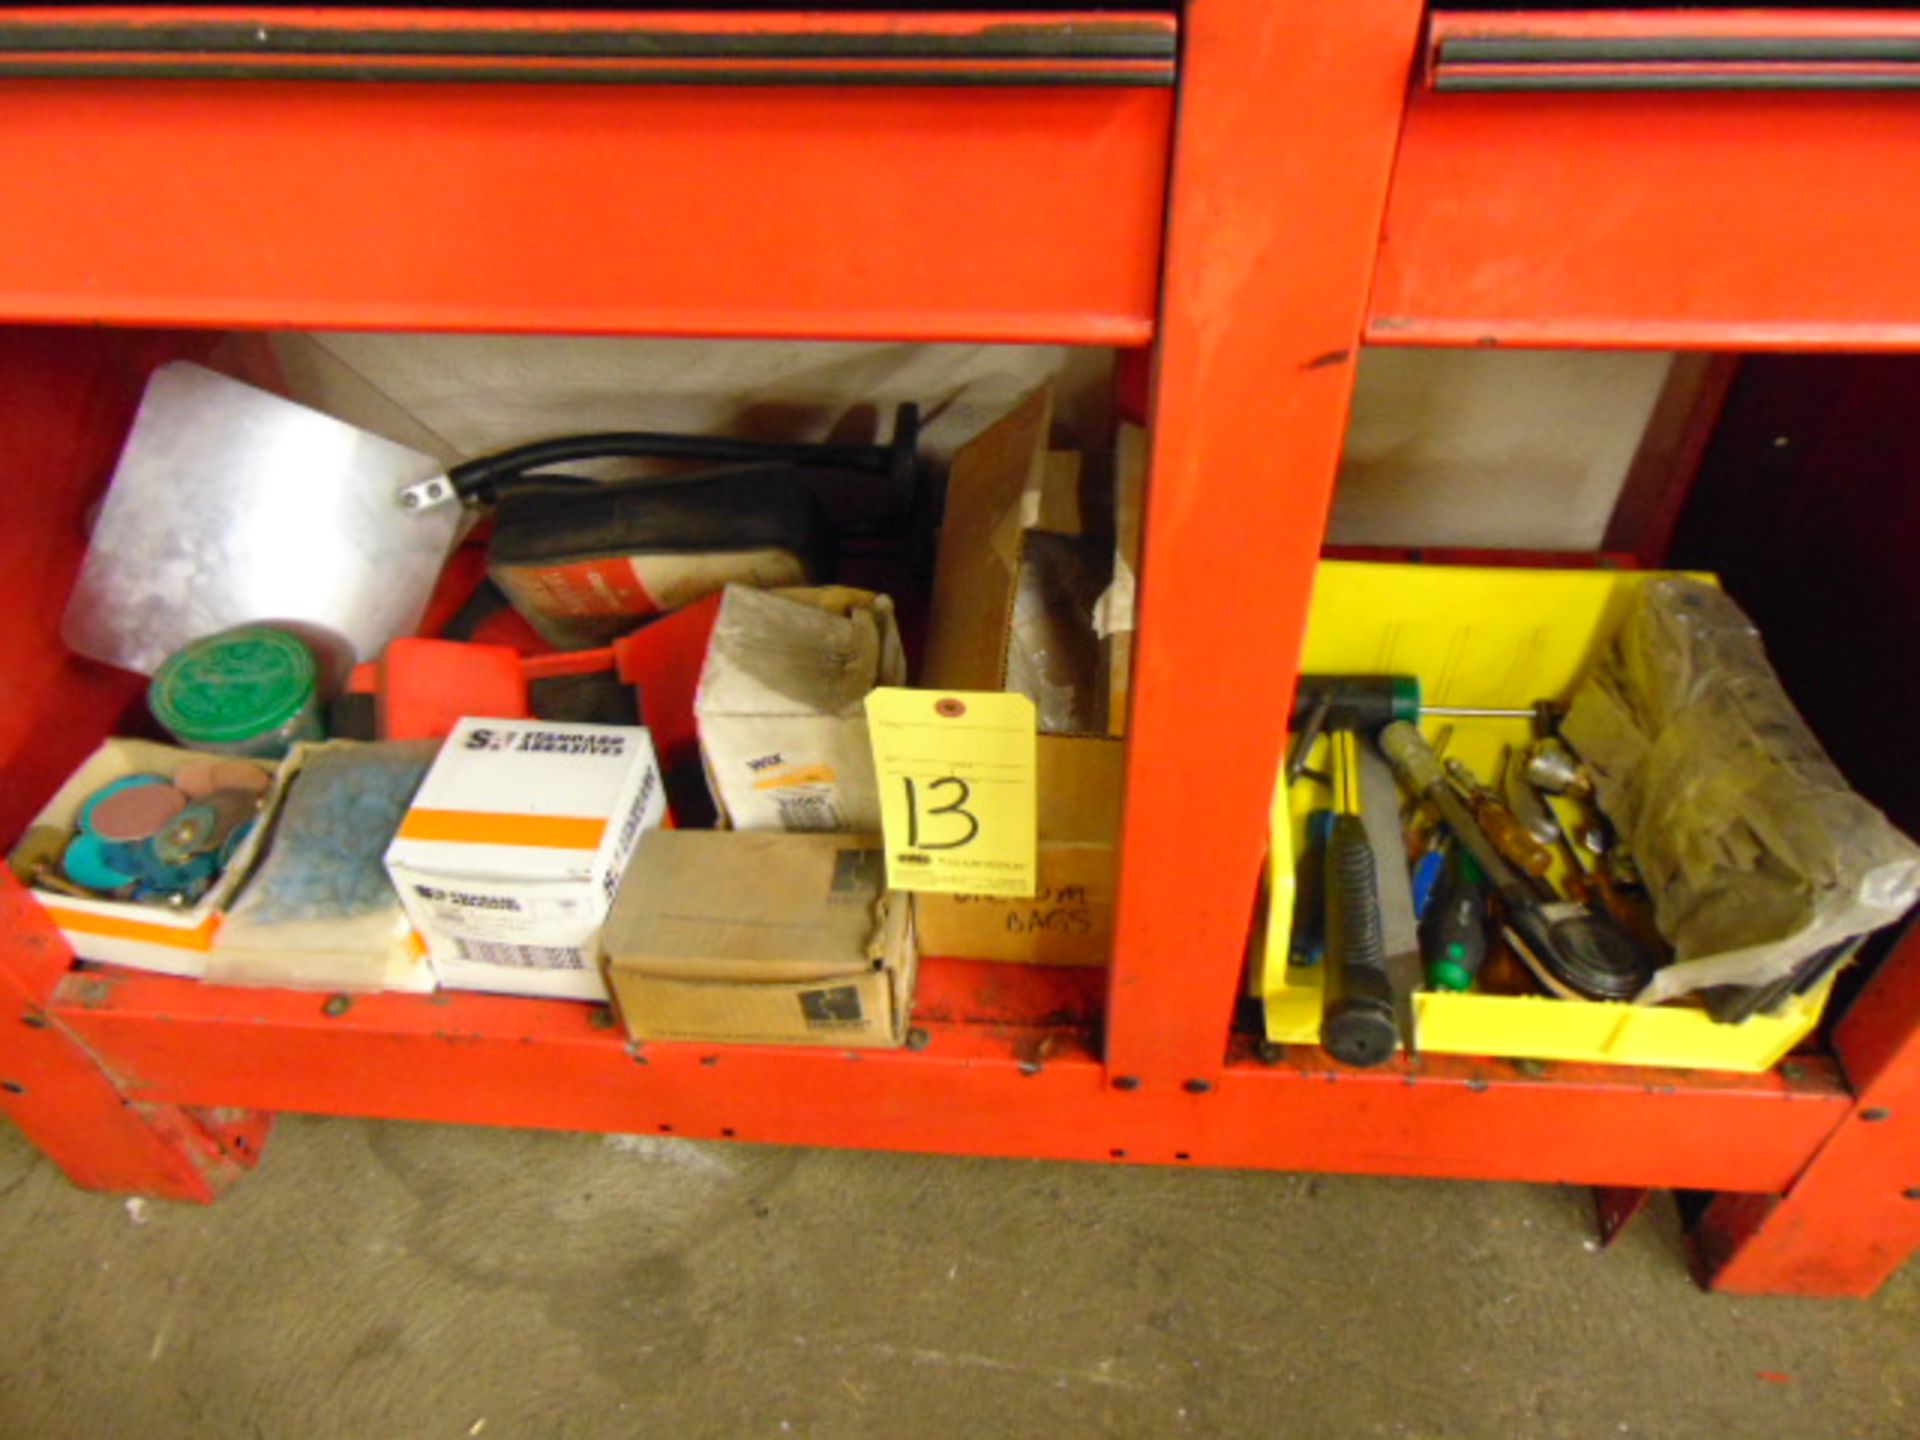 LOT OF HAND TOOLS, assorted (located under two benches)